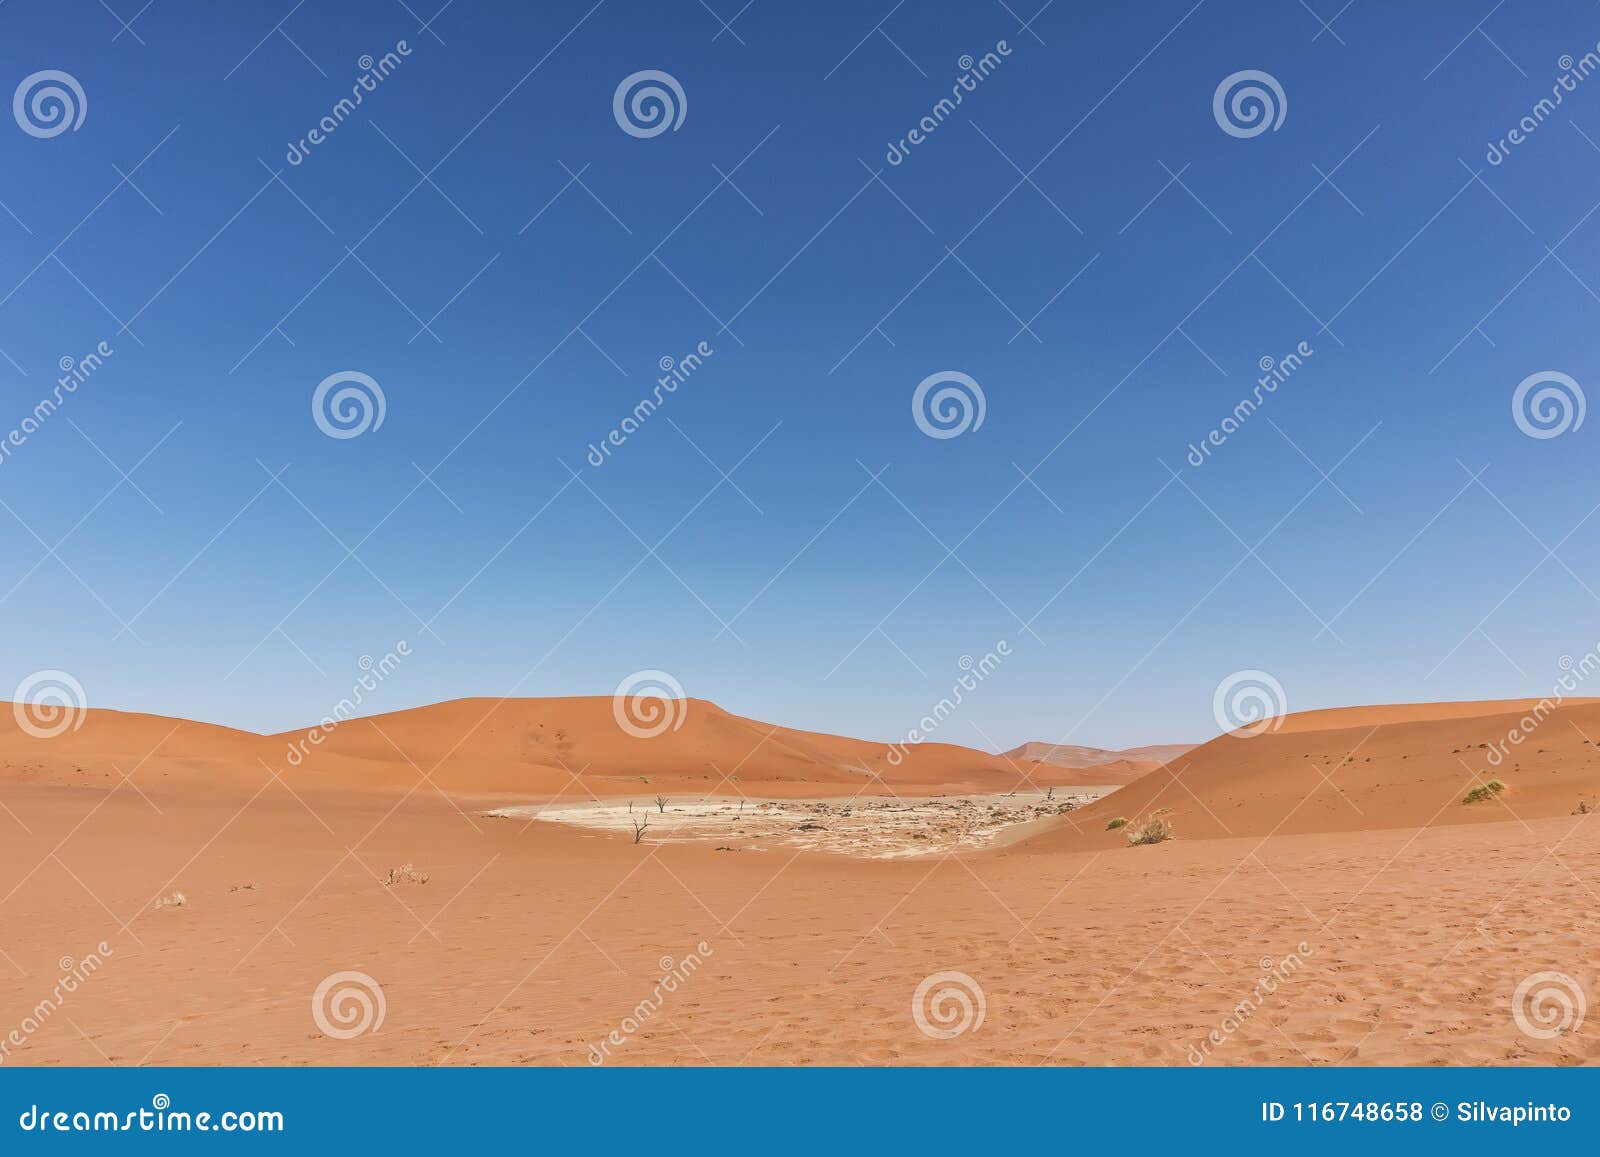 panoramica of death vley in the desert of namibia. sossusvlei.